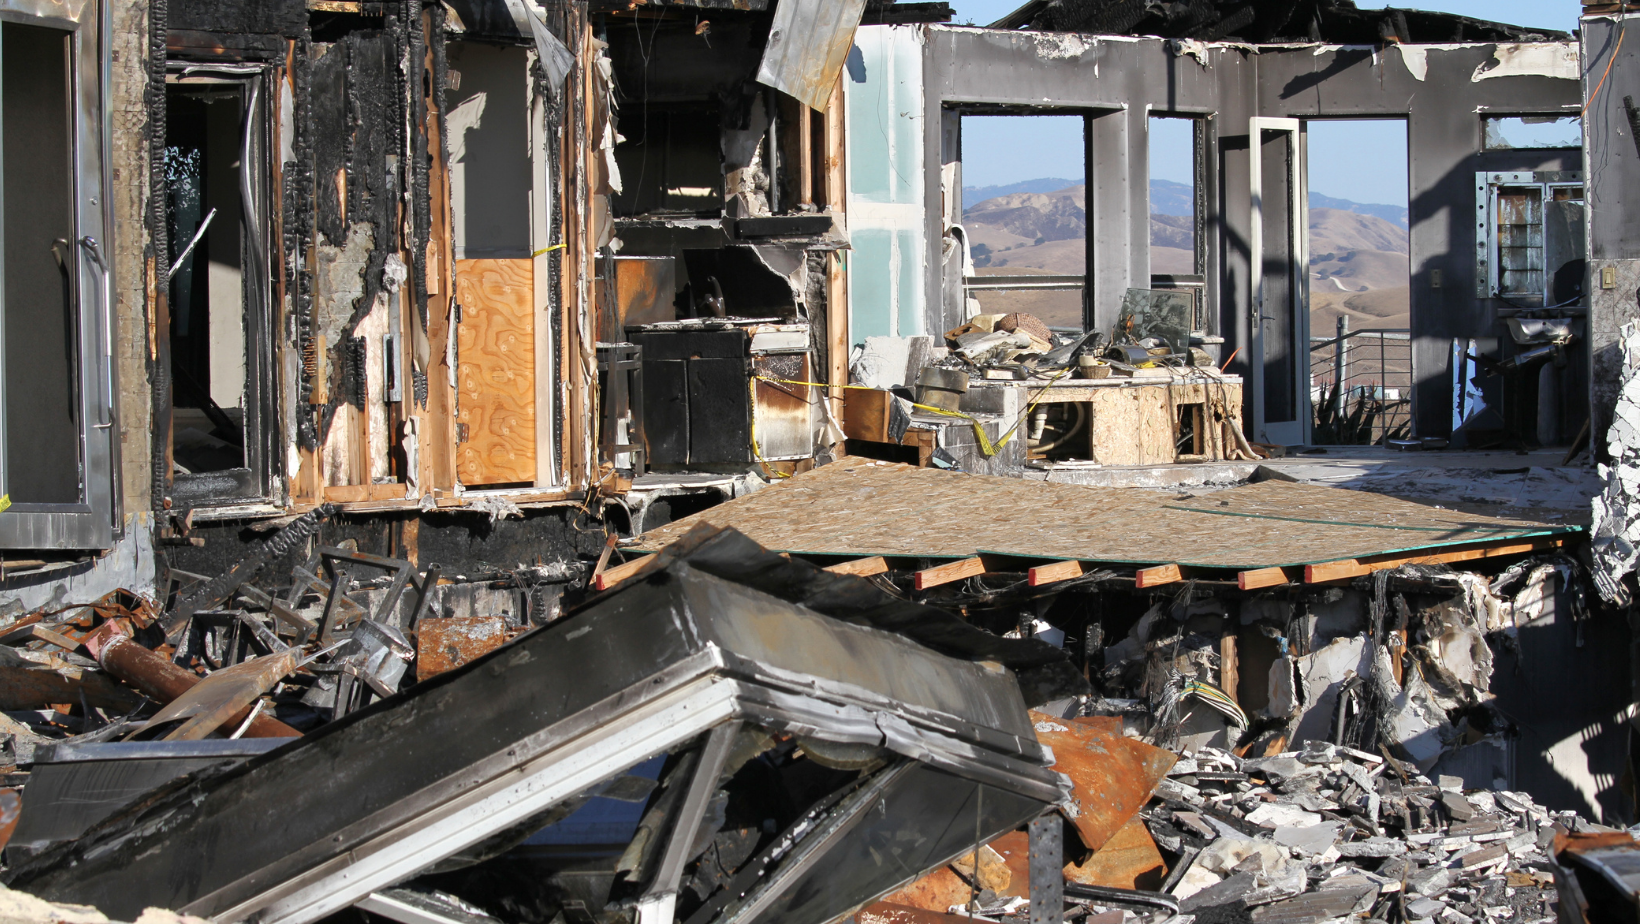 Fire Damage Tips: How To Cleanup After A House Fire